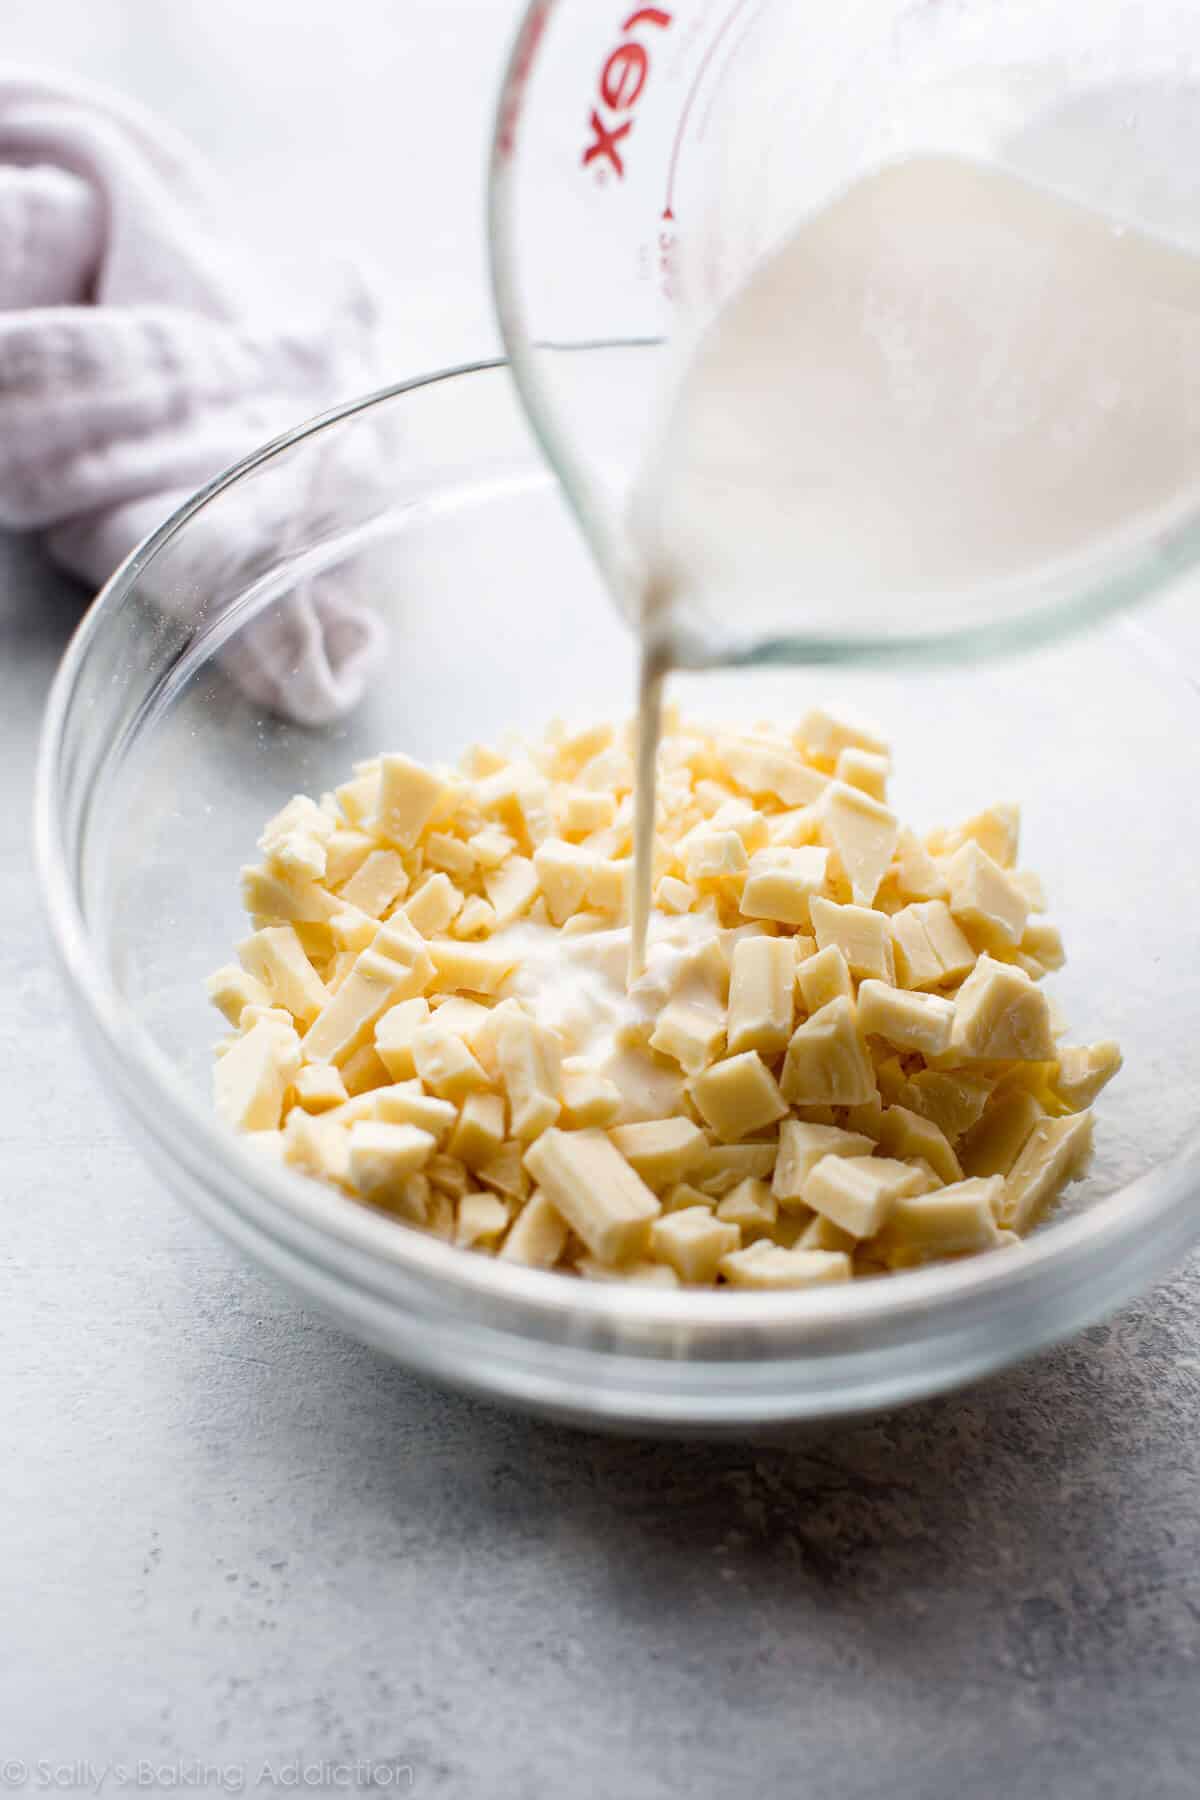 pouring heavy cream on top of white chocolate chunks in a glass bowl